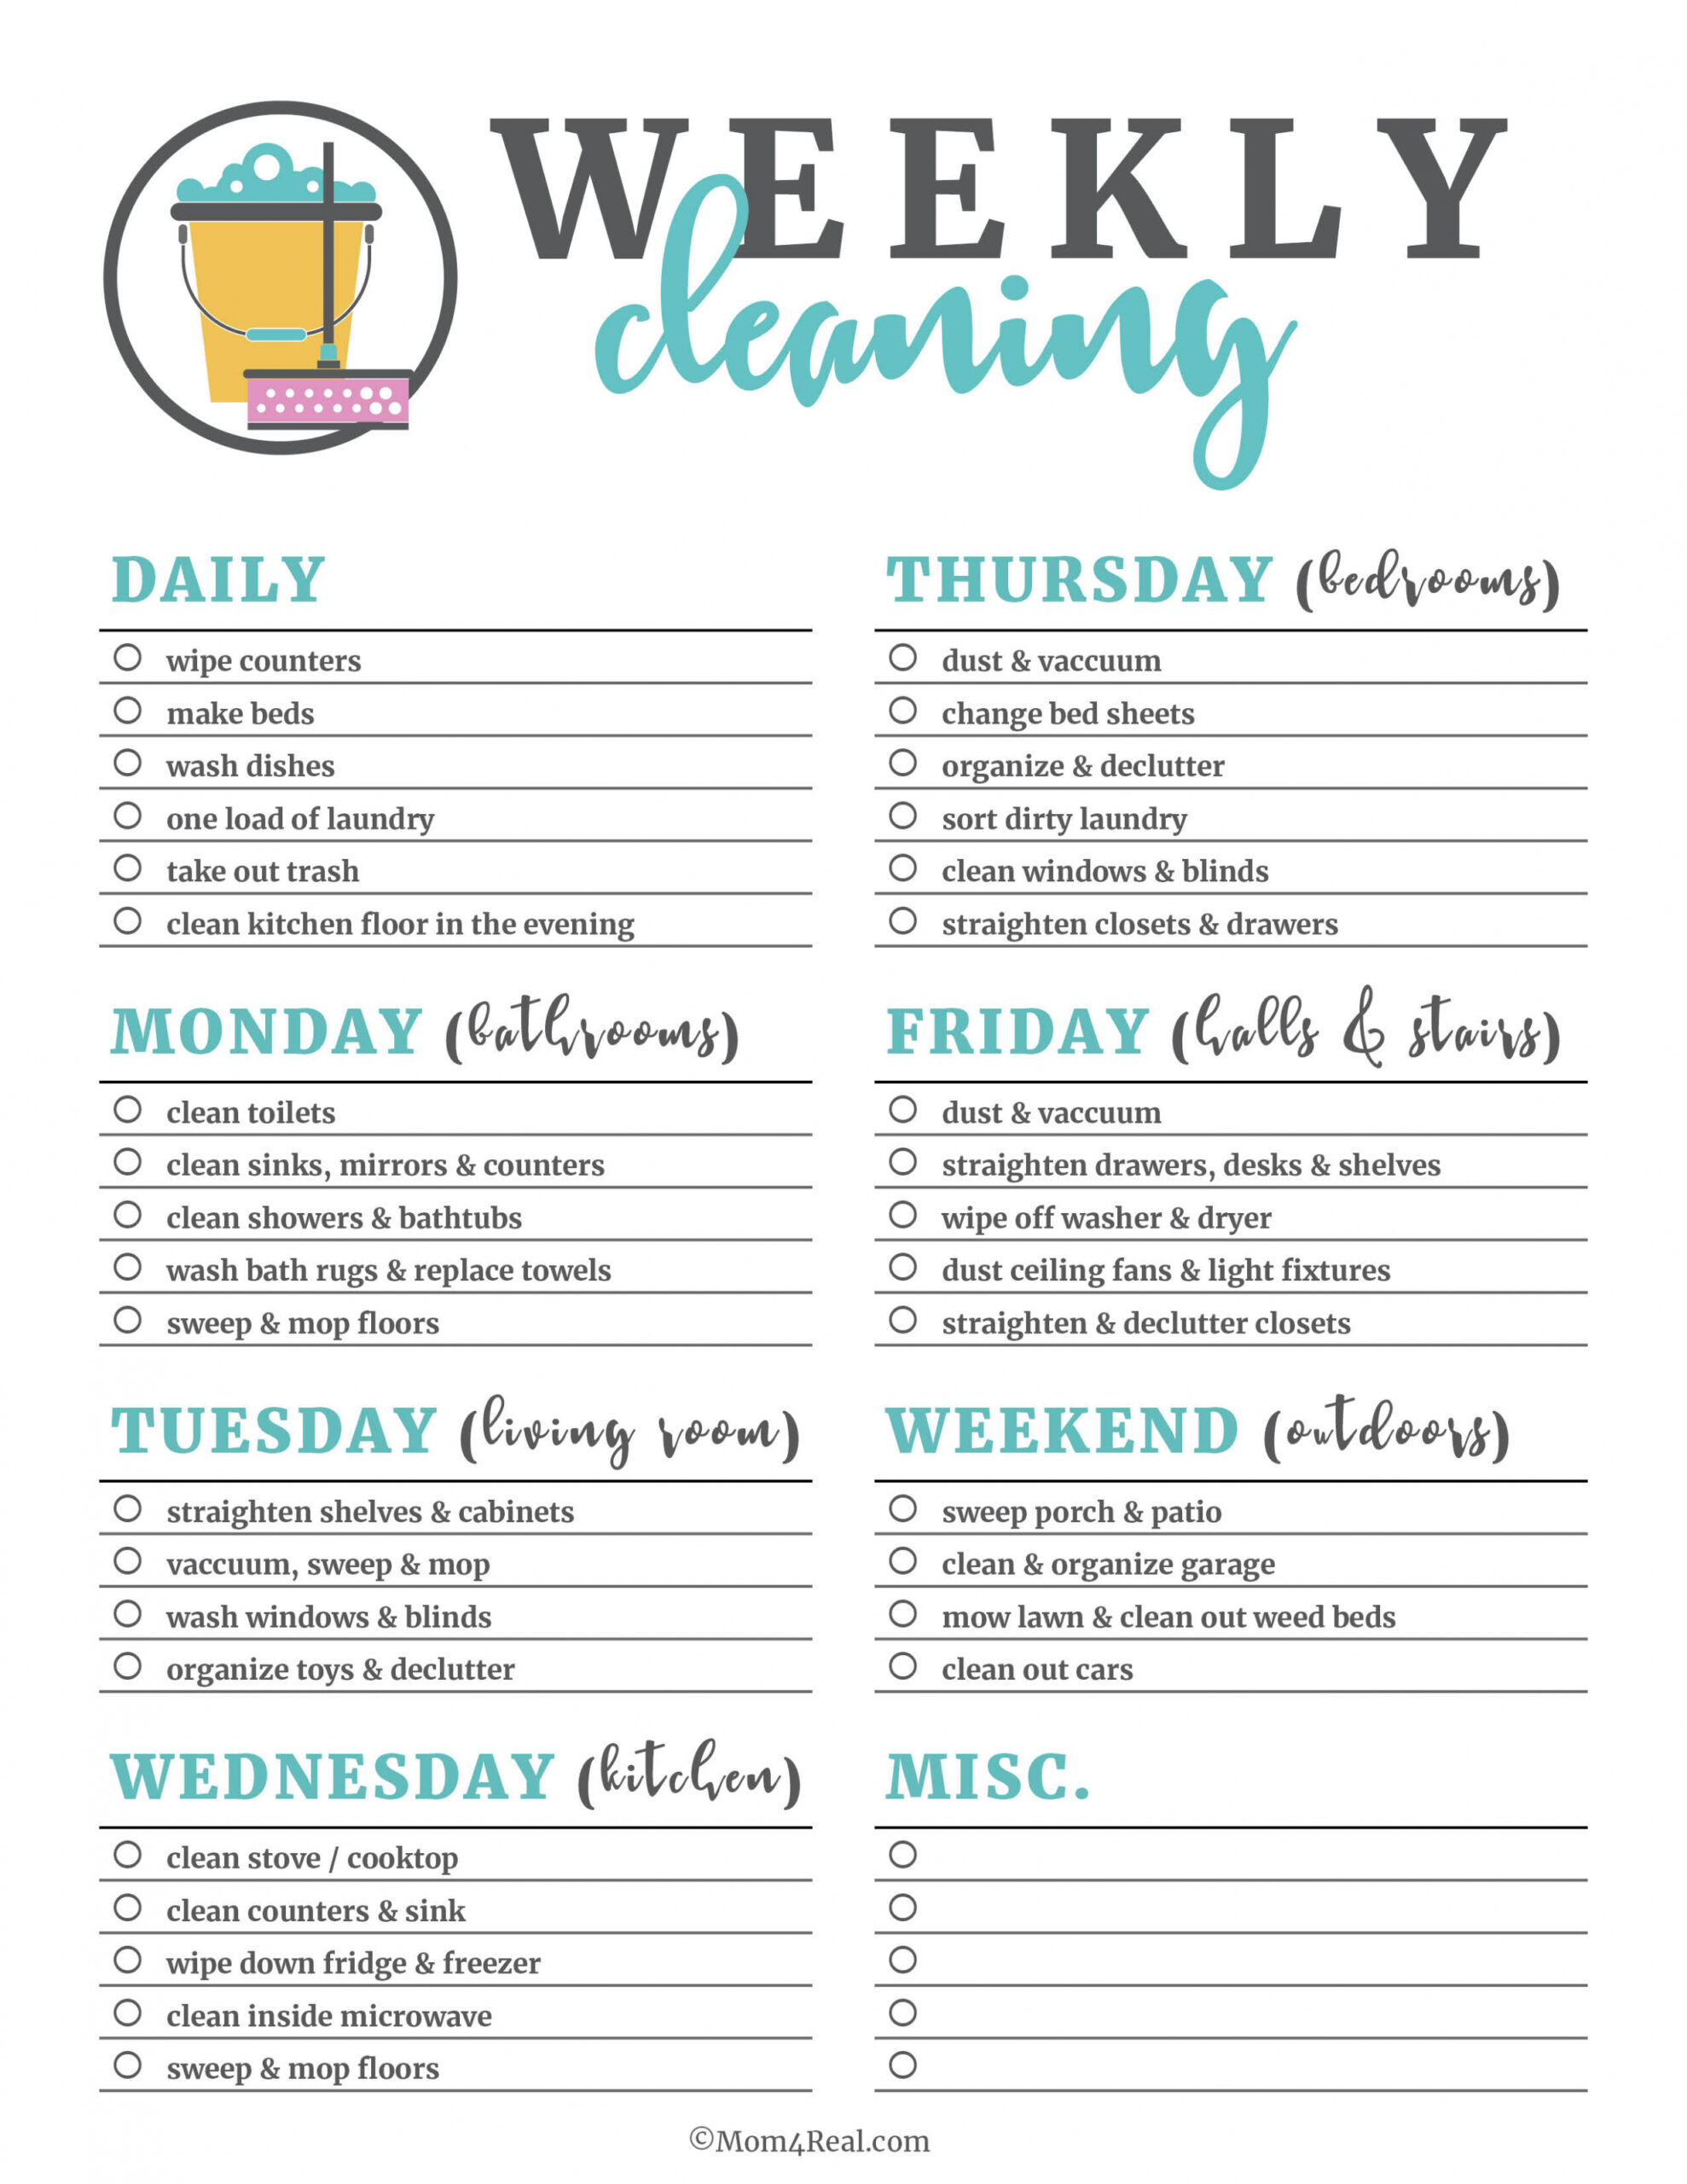  Home Chores Schedule Template PPT